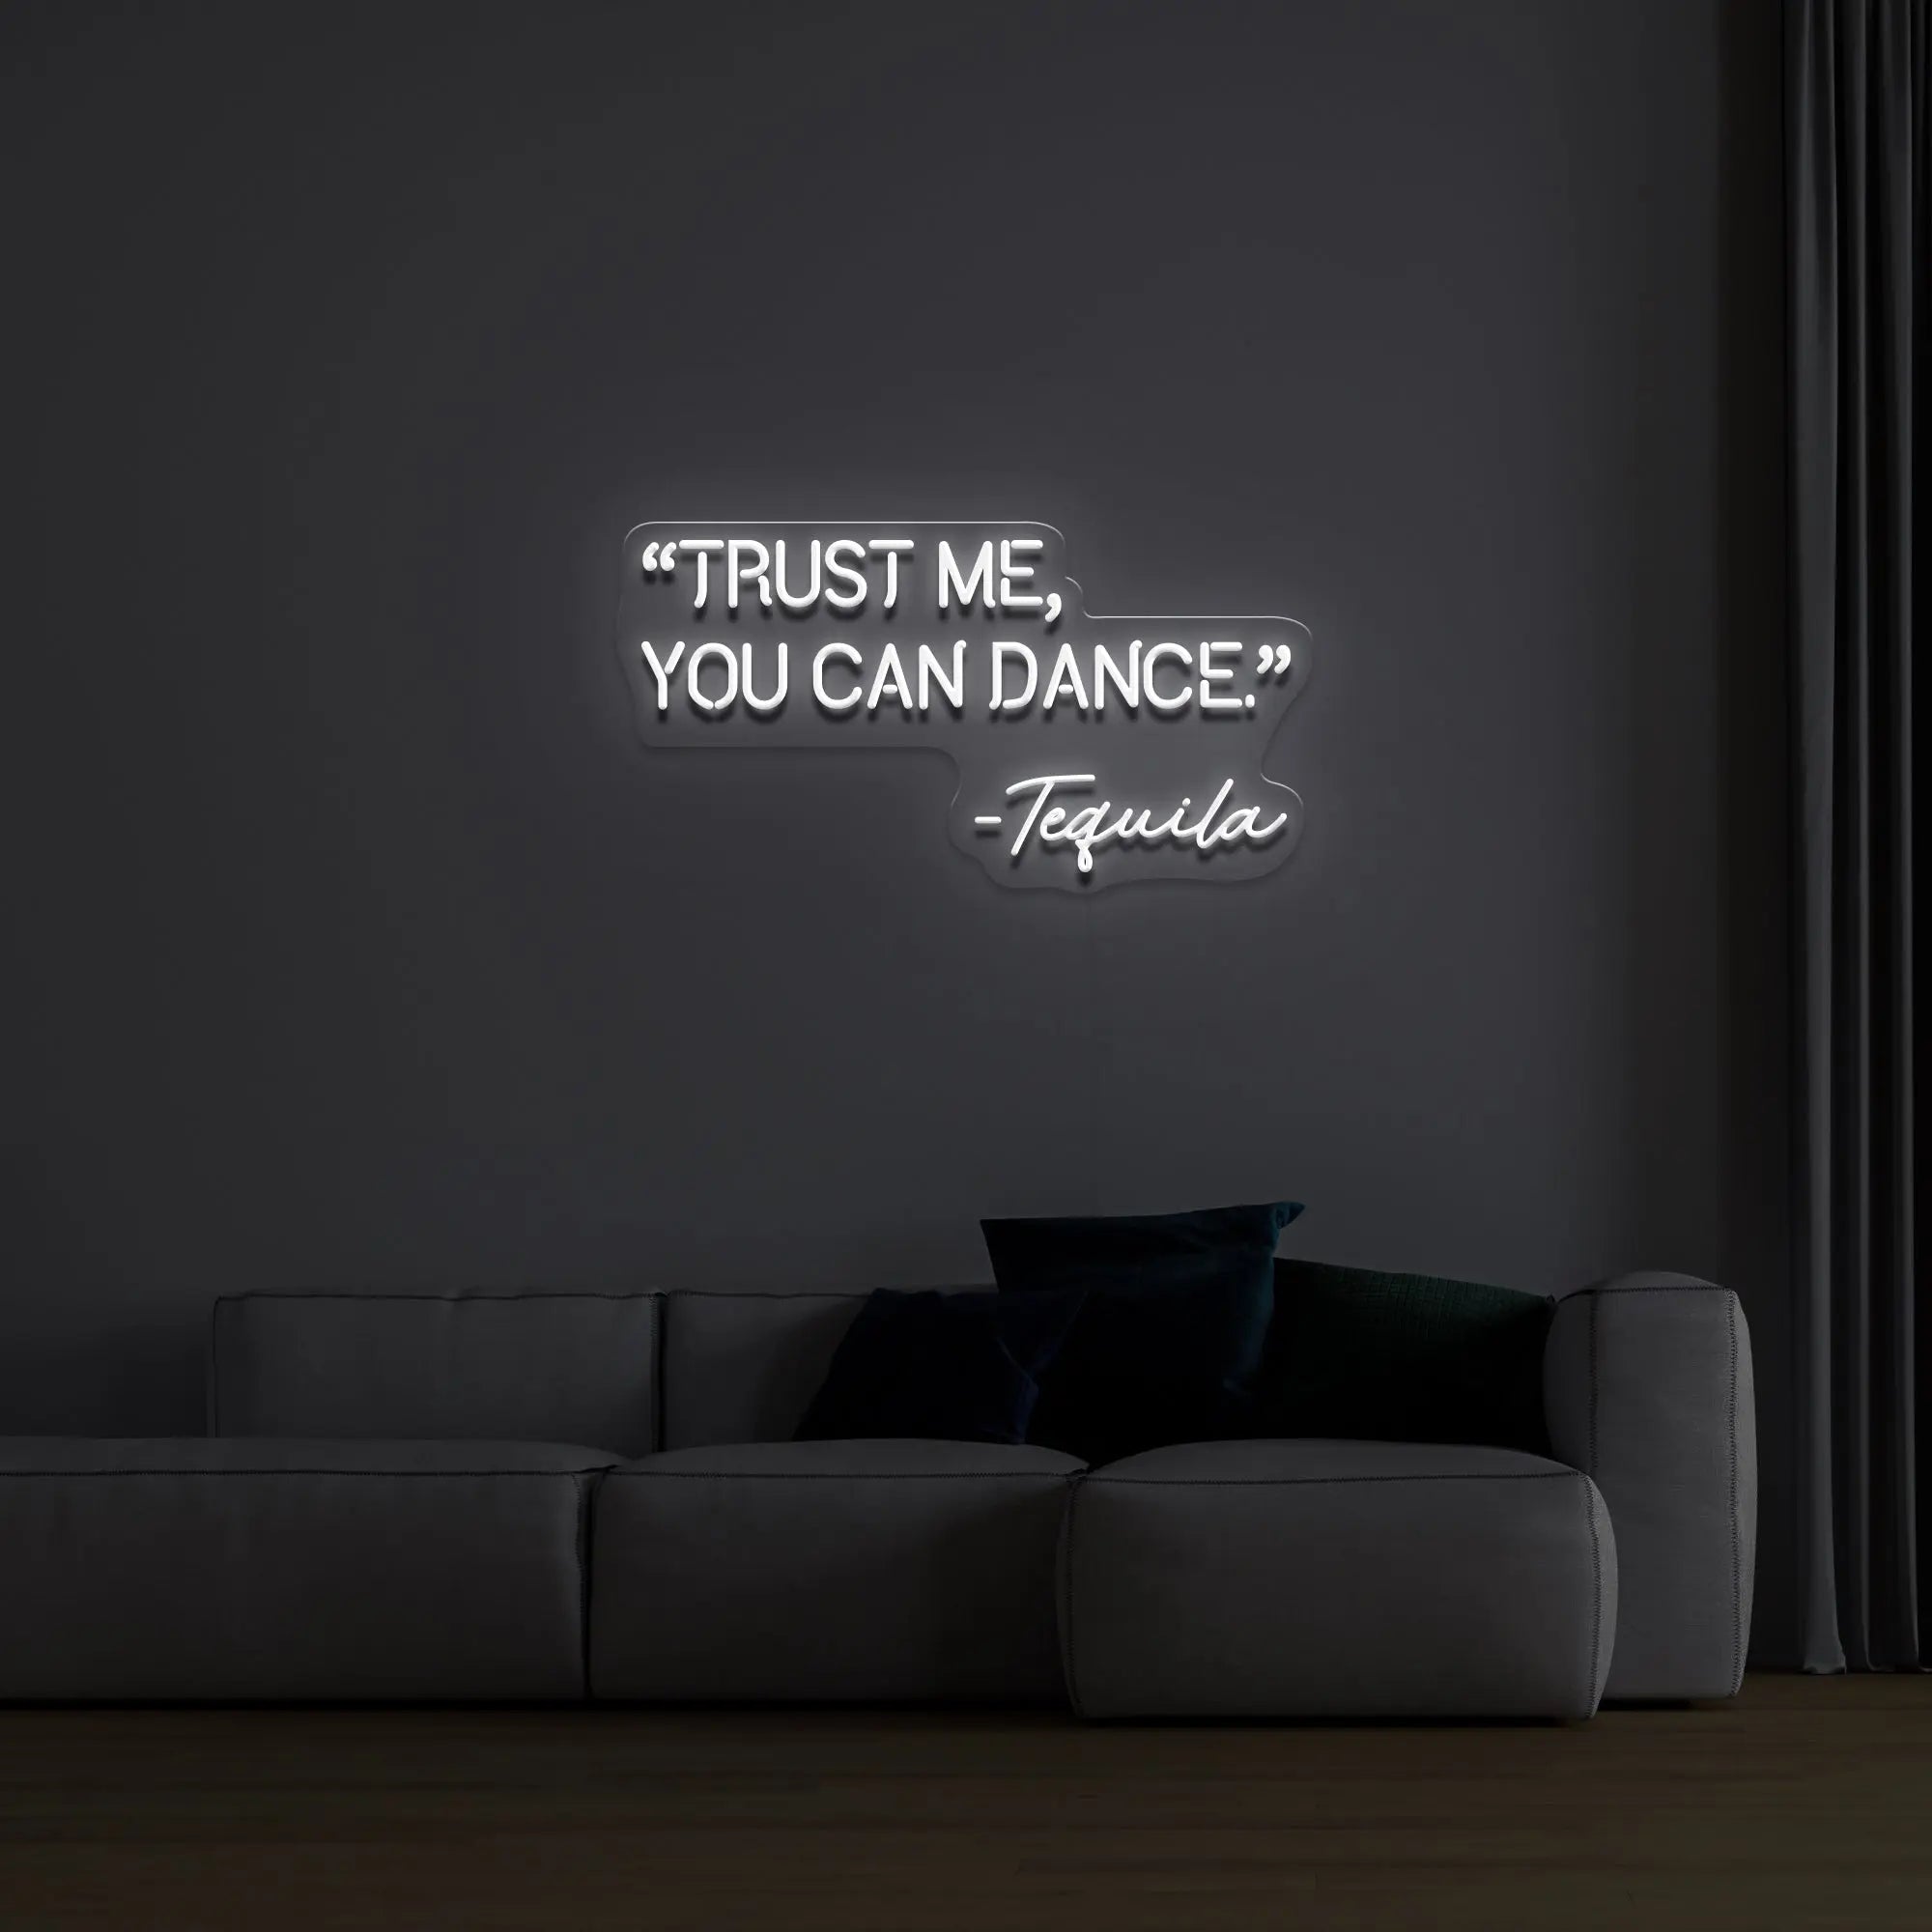 'You Can Dance' LED Neon Sign - neonaffair